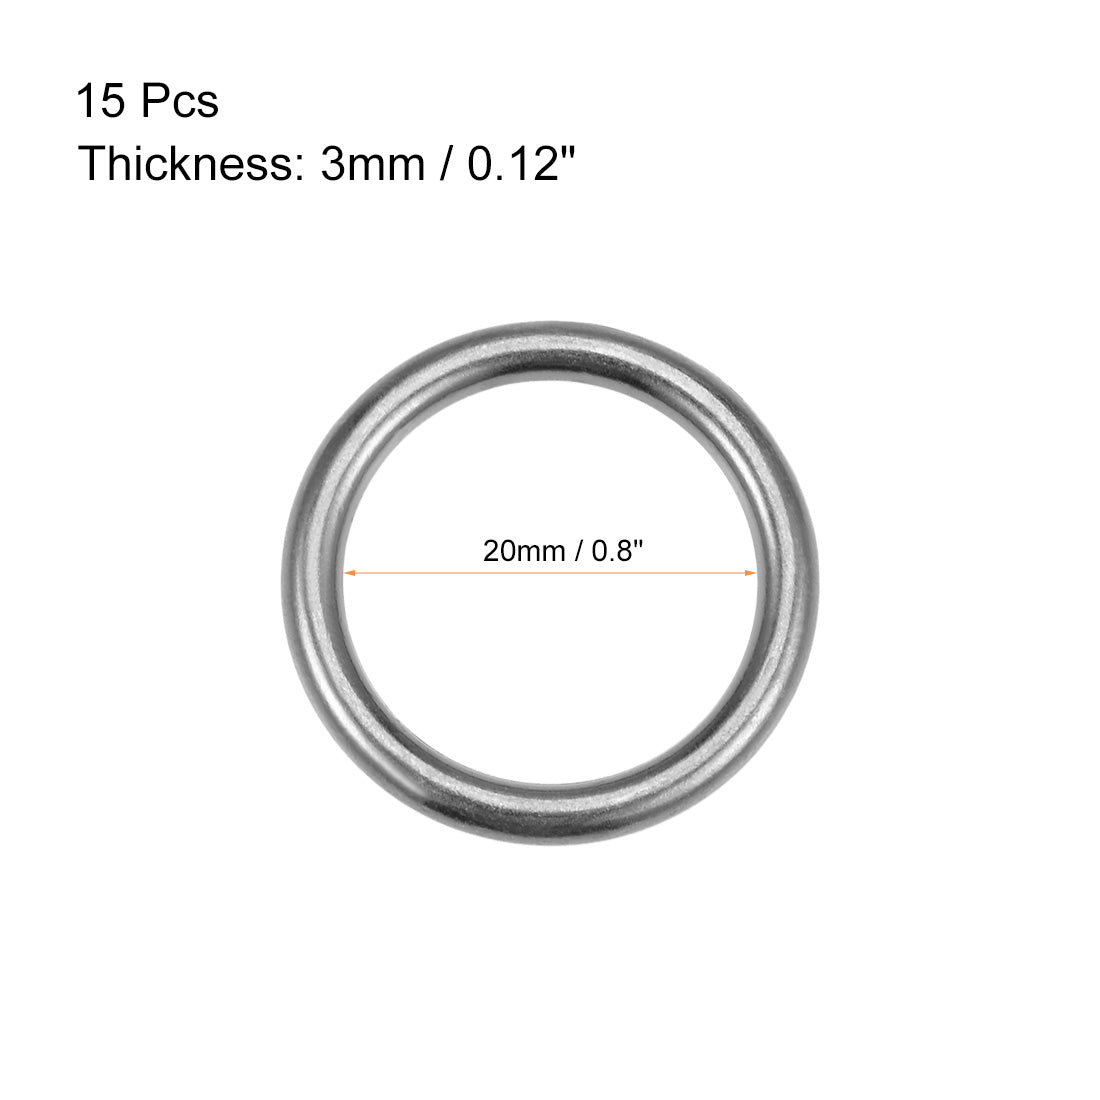 uxcell Uxcell O Ring Buckle 20mm(0.8") ID 3mm Thickness Zinc Alloy O-Rings for Hardware Bags Belts Craft DIY Accessories, Black 15pcs